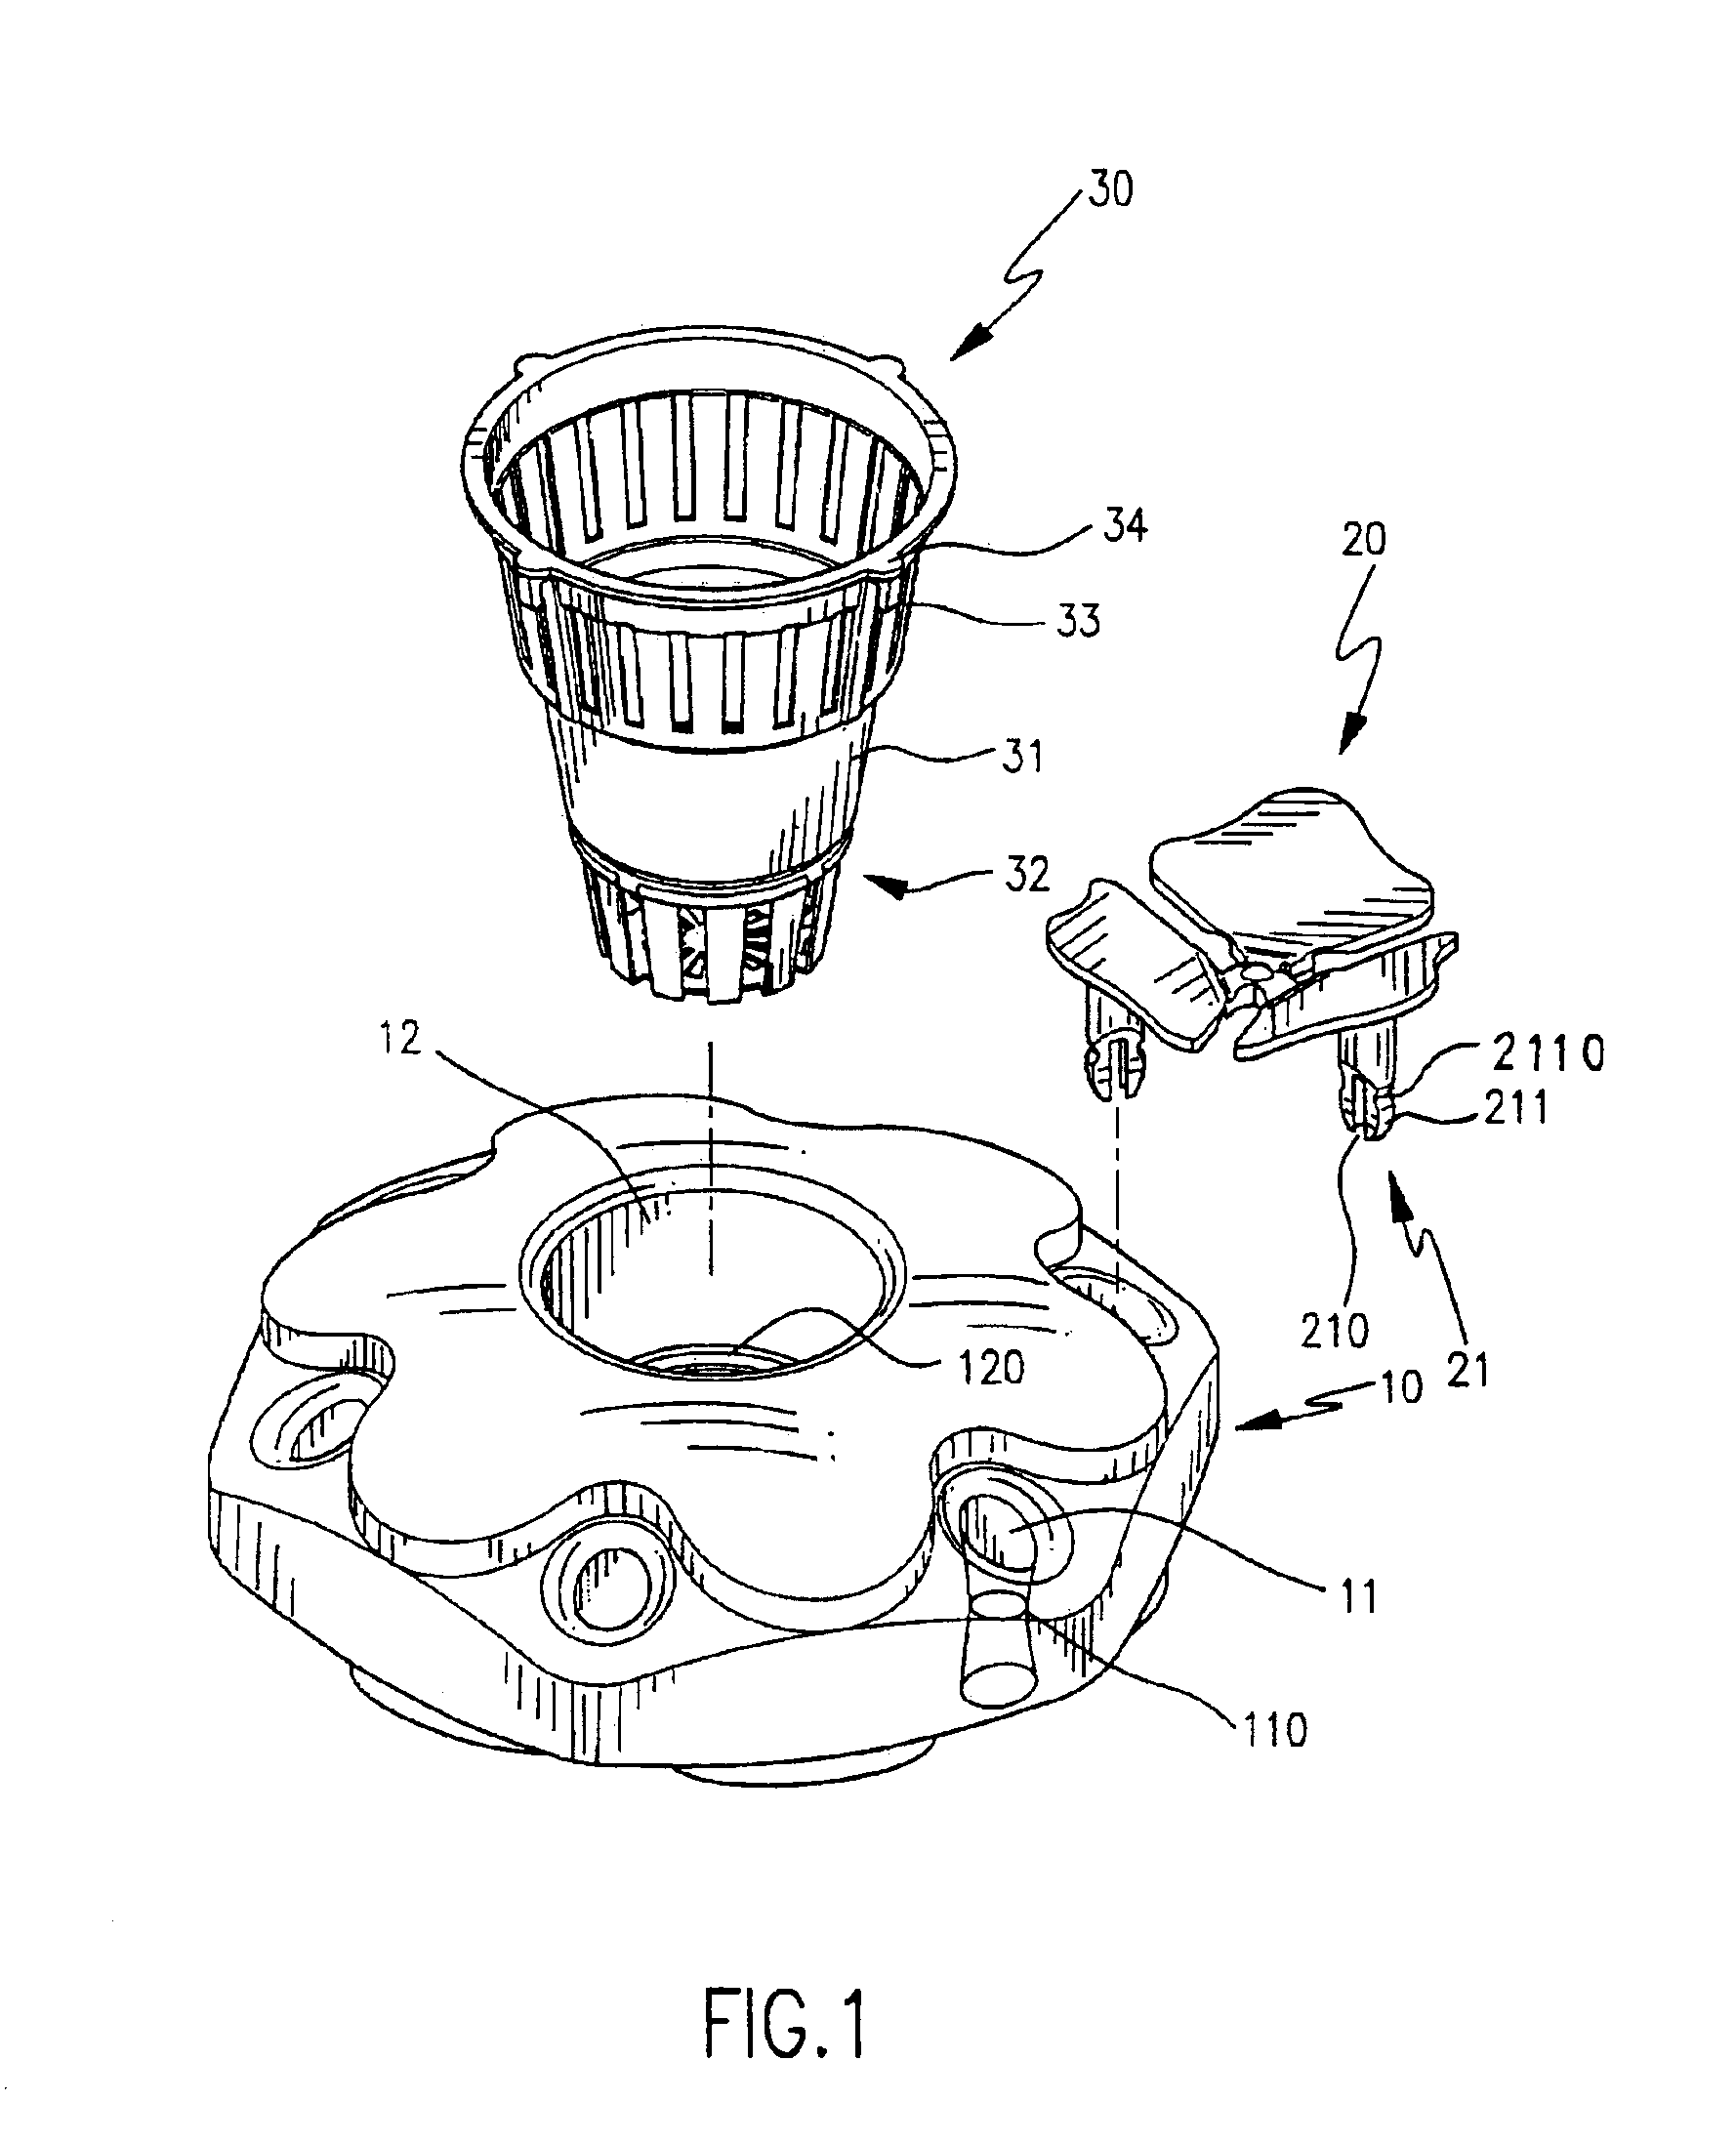 Floatable plant cultivation device